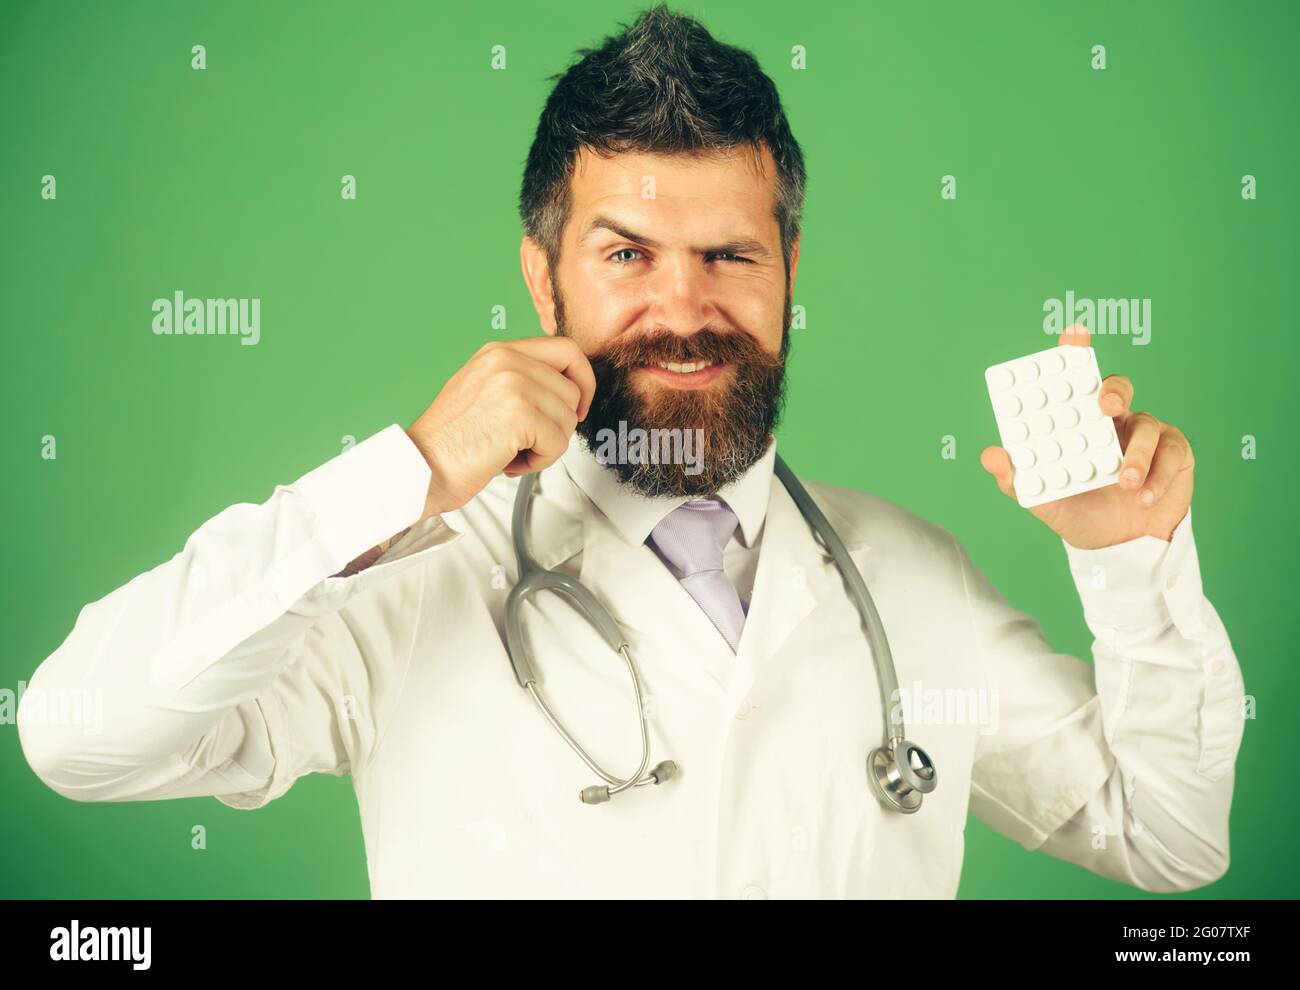 Treatment and healthcare. Smiling doctor or male nurse with stethoscope with pills in hand. Stock Photo